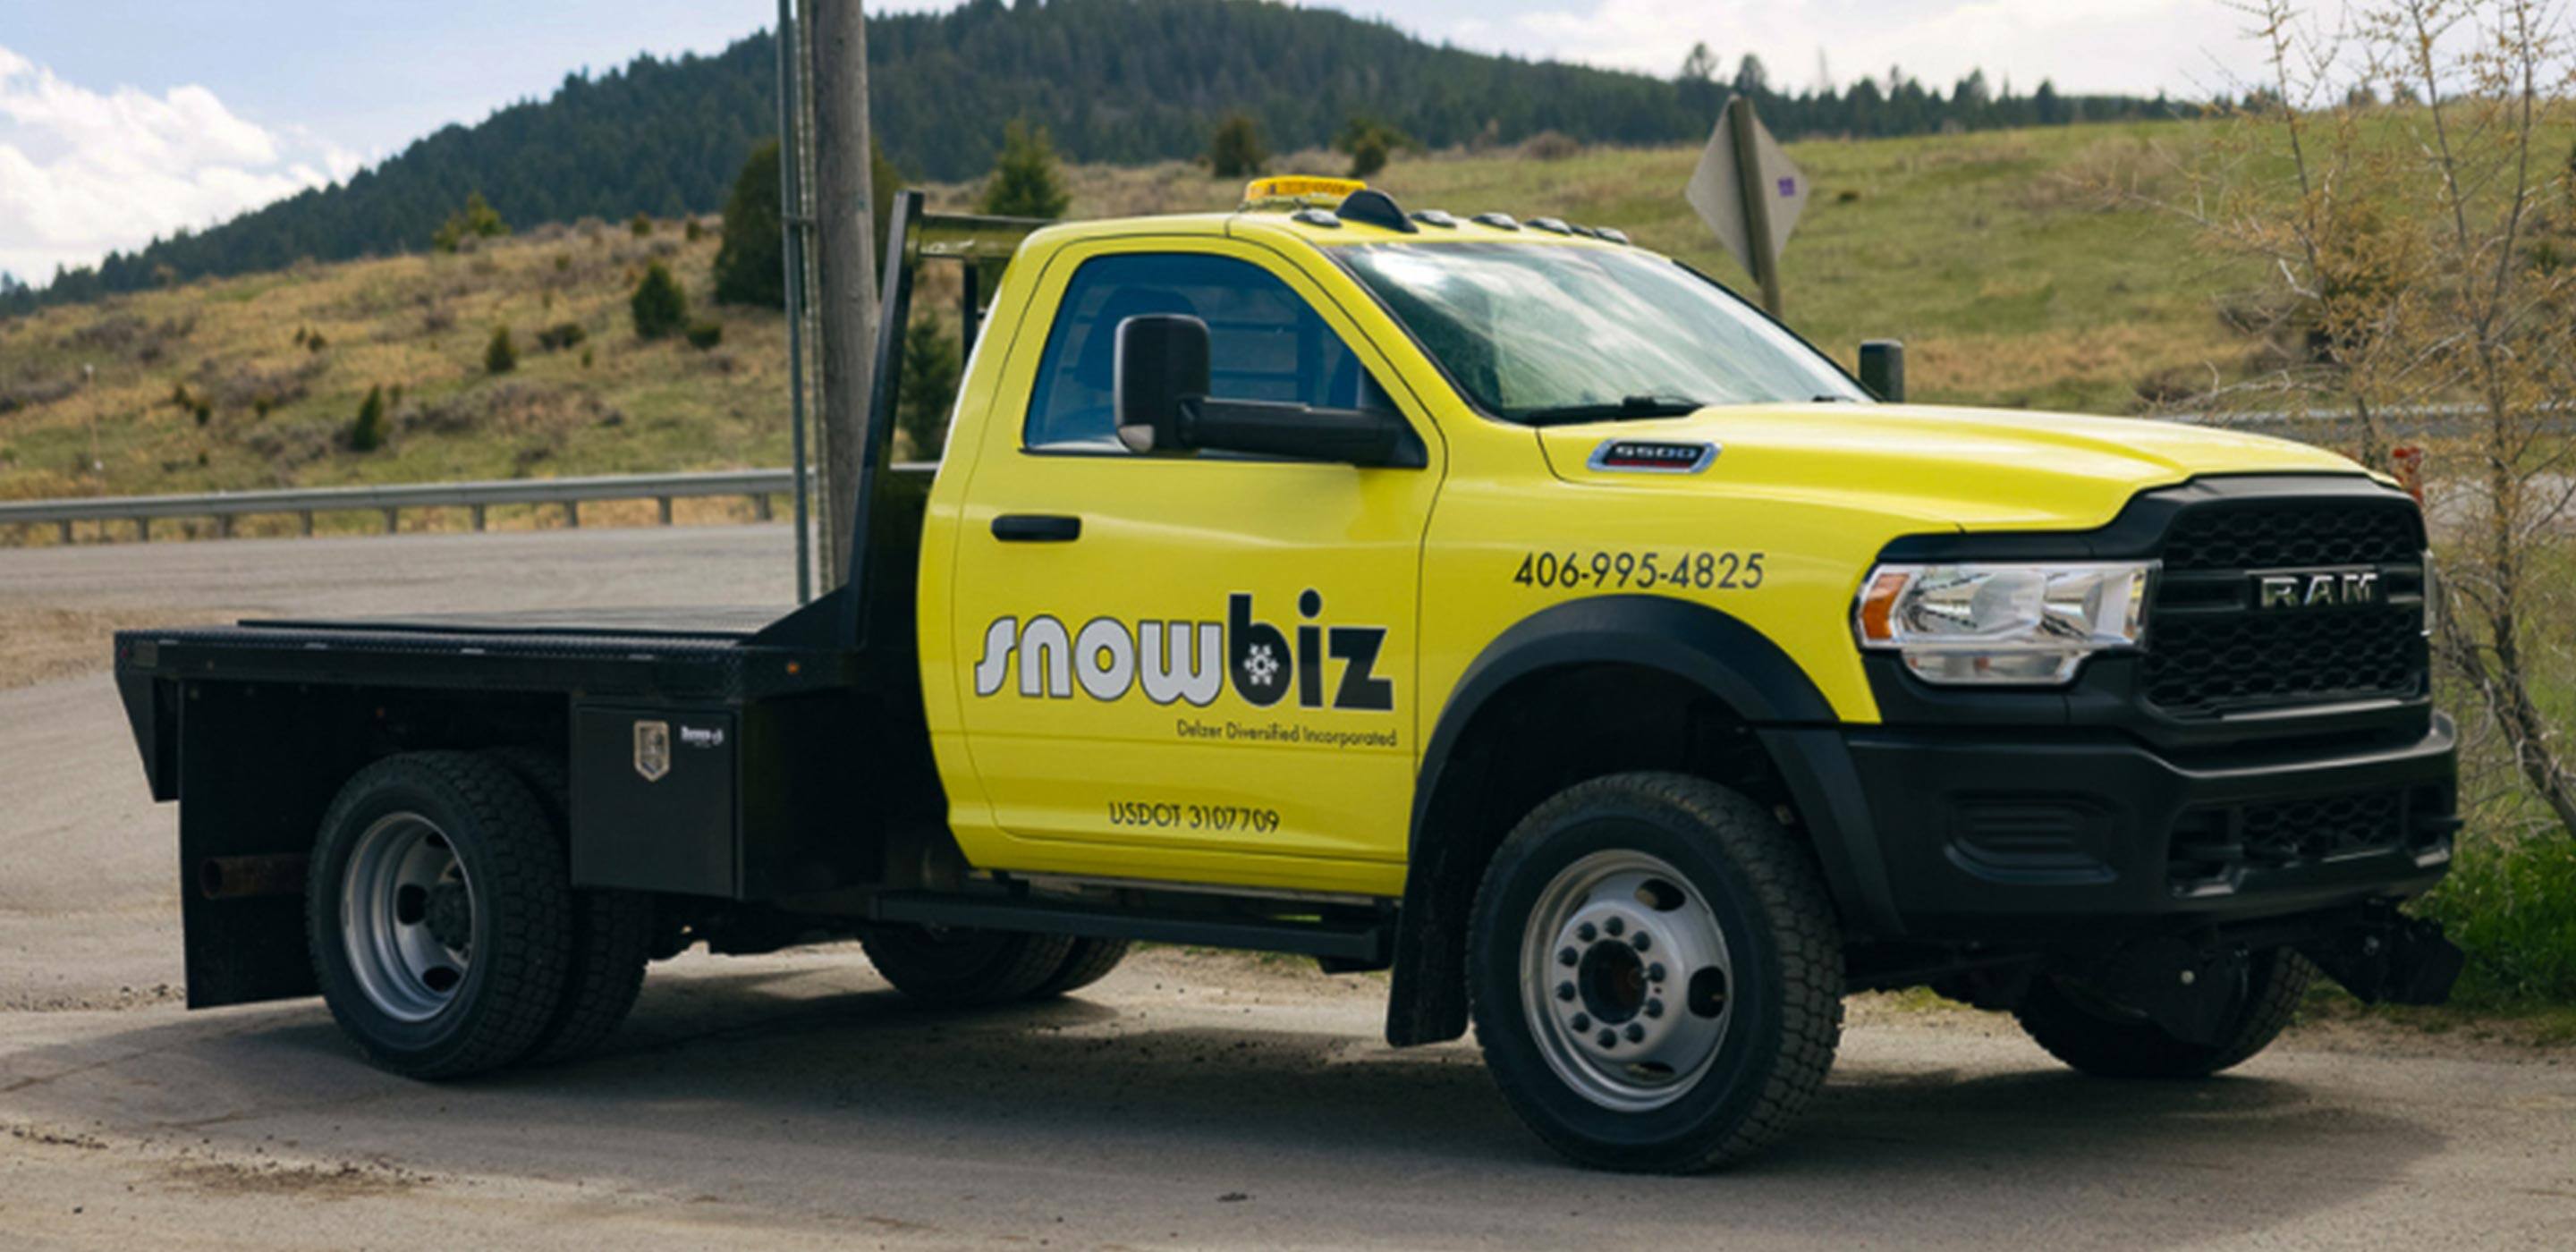 Display A 2022 Ram Chassis Cab with a snow removal logo on its side.